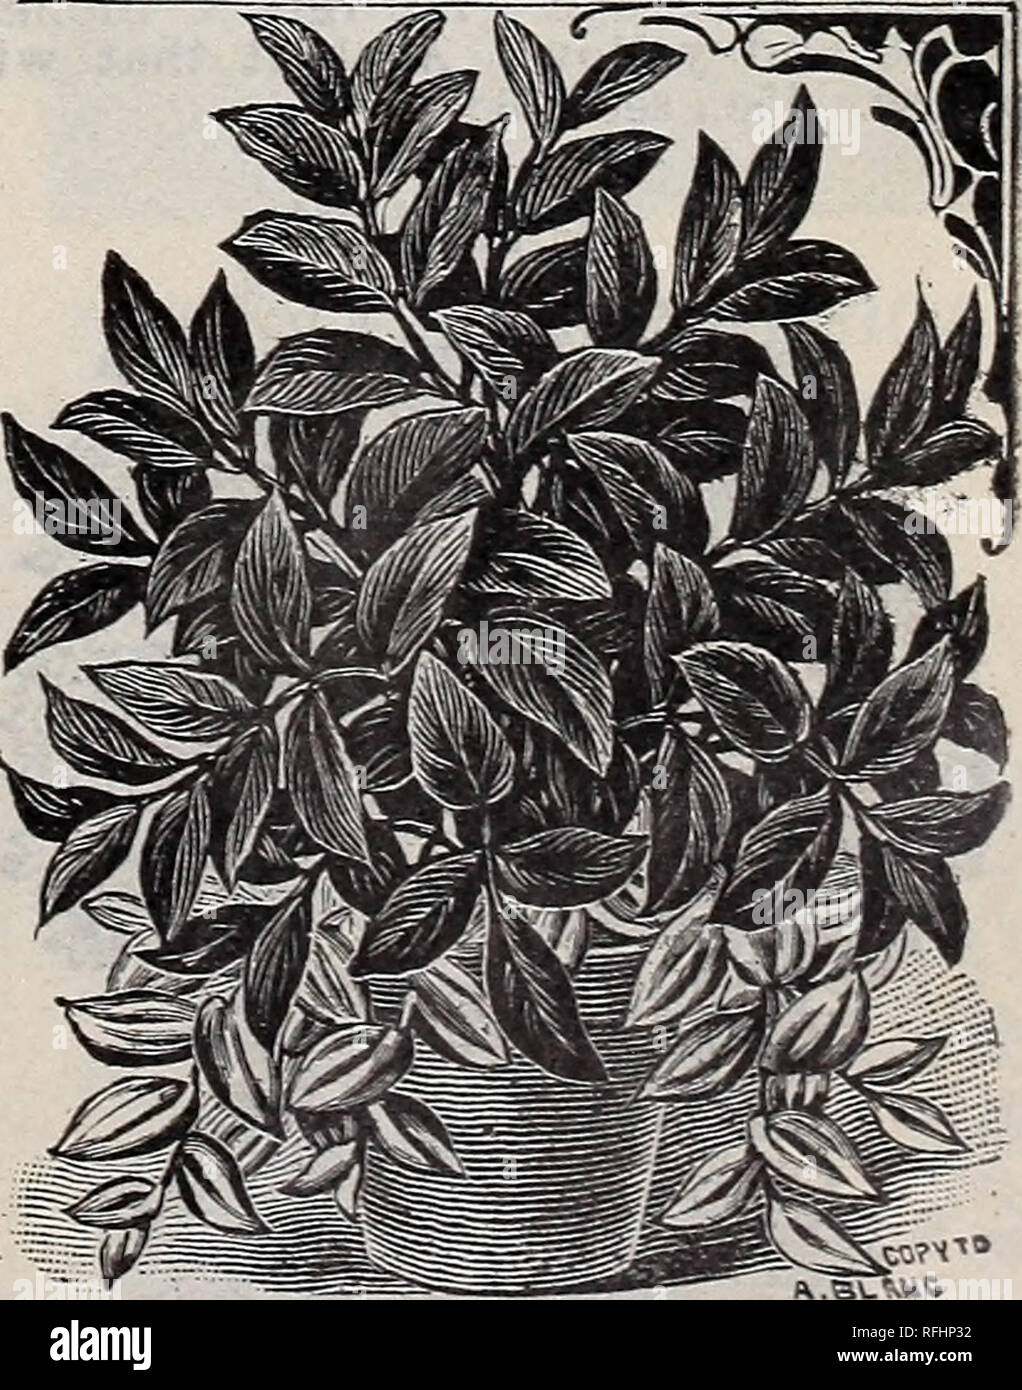 . 1900 catalogue of reliable garden and agricultural seeds. Nursery stock Pennsylvania Catalogs; Flowers Seeds Catalogs; Vegetables Seeds Catalogs; Fruit Seeds Catalogs. ANTIGONON—Mountain Rose. Numberless clusters of deep pink blos- soms so completely cover the vine as to almost hide the foliage. Grand and ef- fective when grown in a sunny spot- Hardy with slight covering. 15c.; seed, lOc.. AERVA SANGUINEA. Blood Leaf. Received under this name from South America. It is an ele- gant indoor plant, with dark deep red leaves, forming a charming contrast with other green-leaved plants. Good novelt Stock Photo